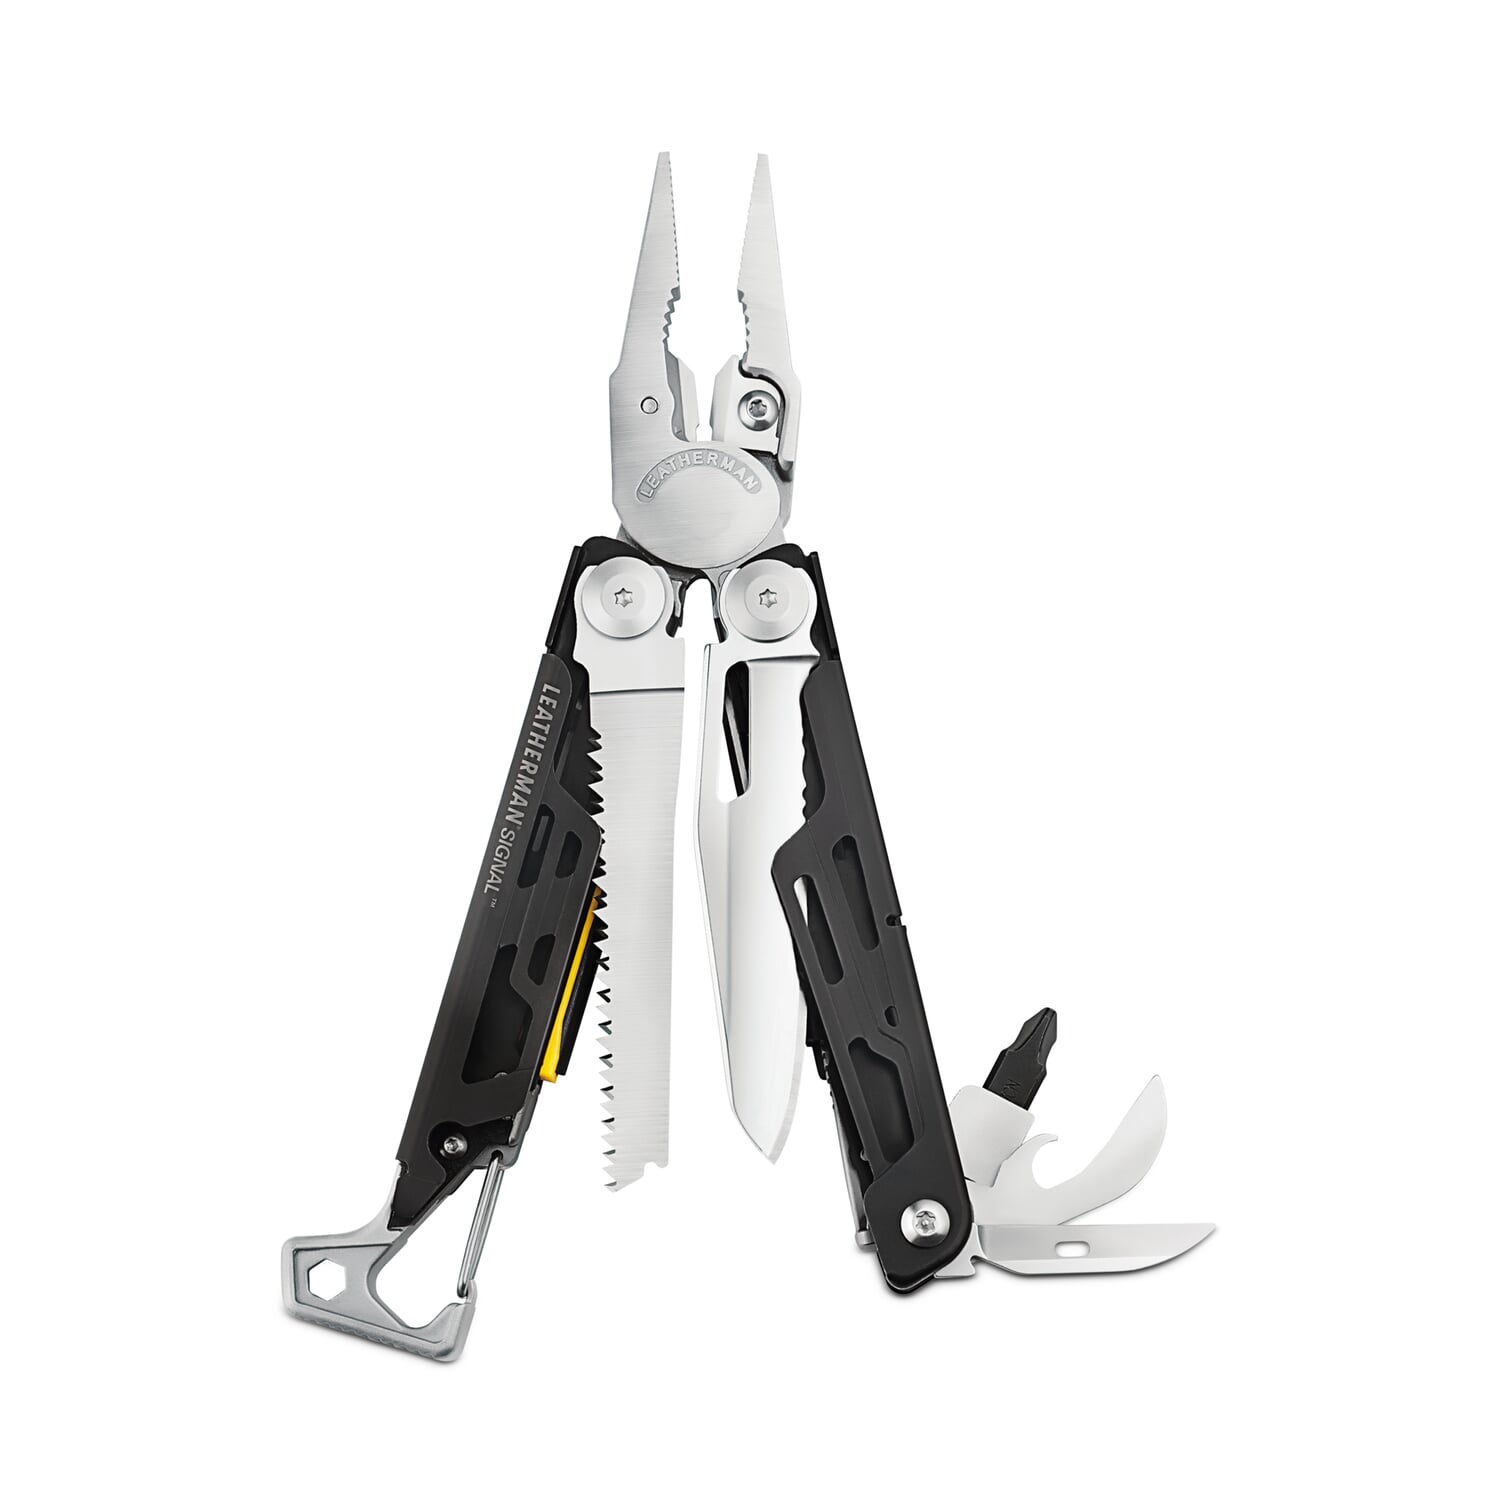 Leatherman Signal: How And Why It Was Made